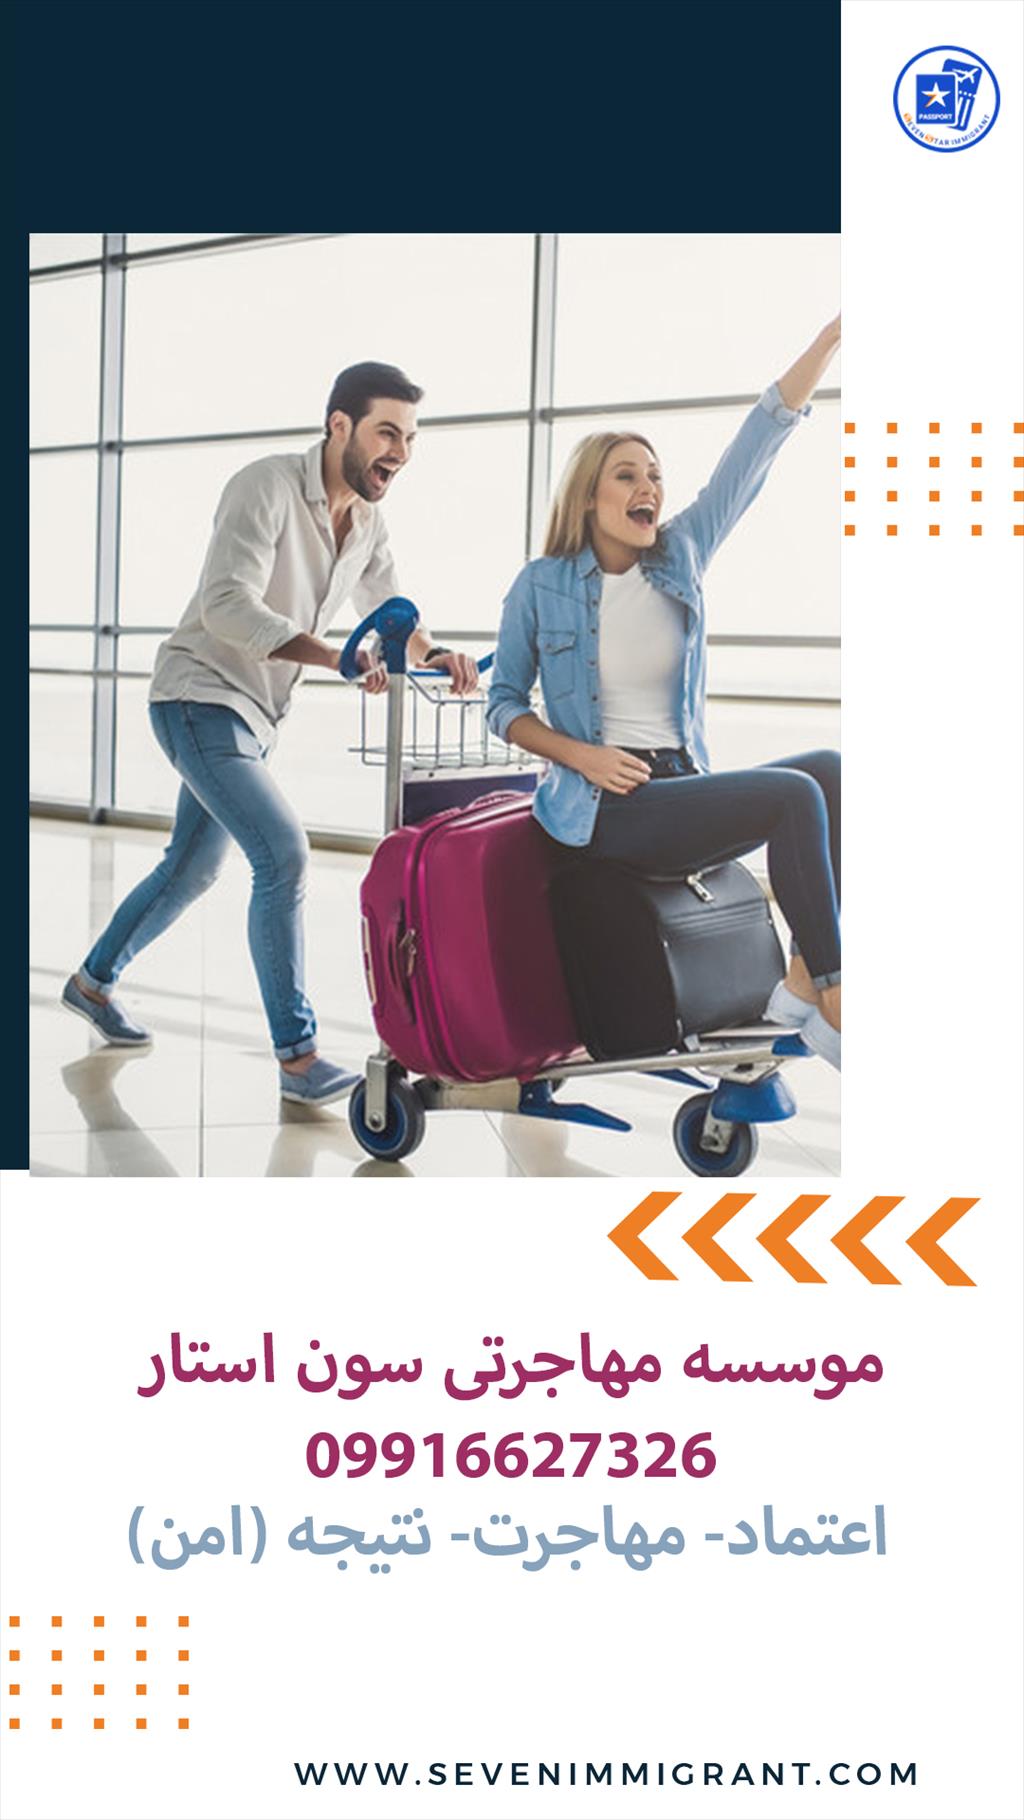 Easy migration with Seven Star<br/>Seven Star Immigration Group, relying on its many years of credibility and high expertise, has been able to provide its tour-travel travel-services travel-services